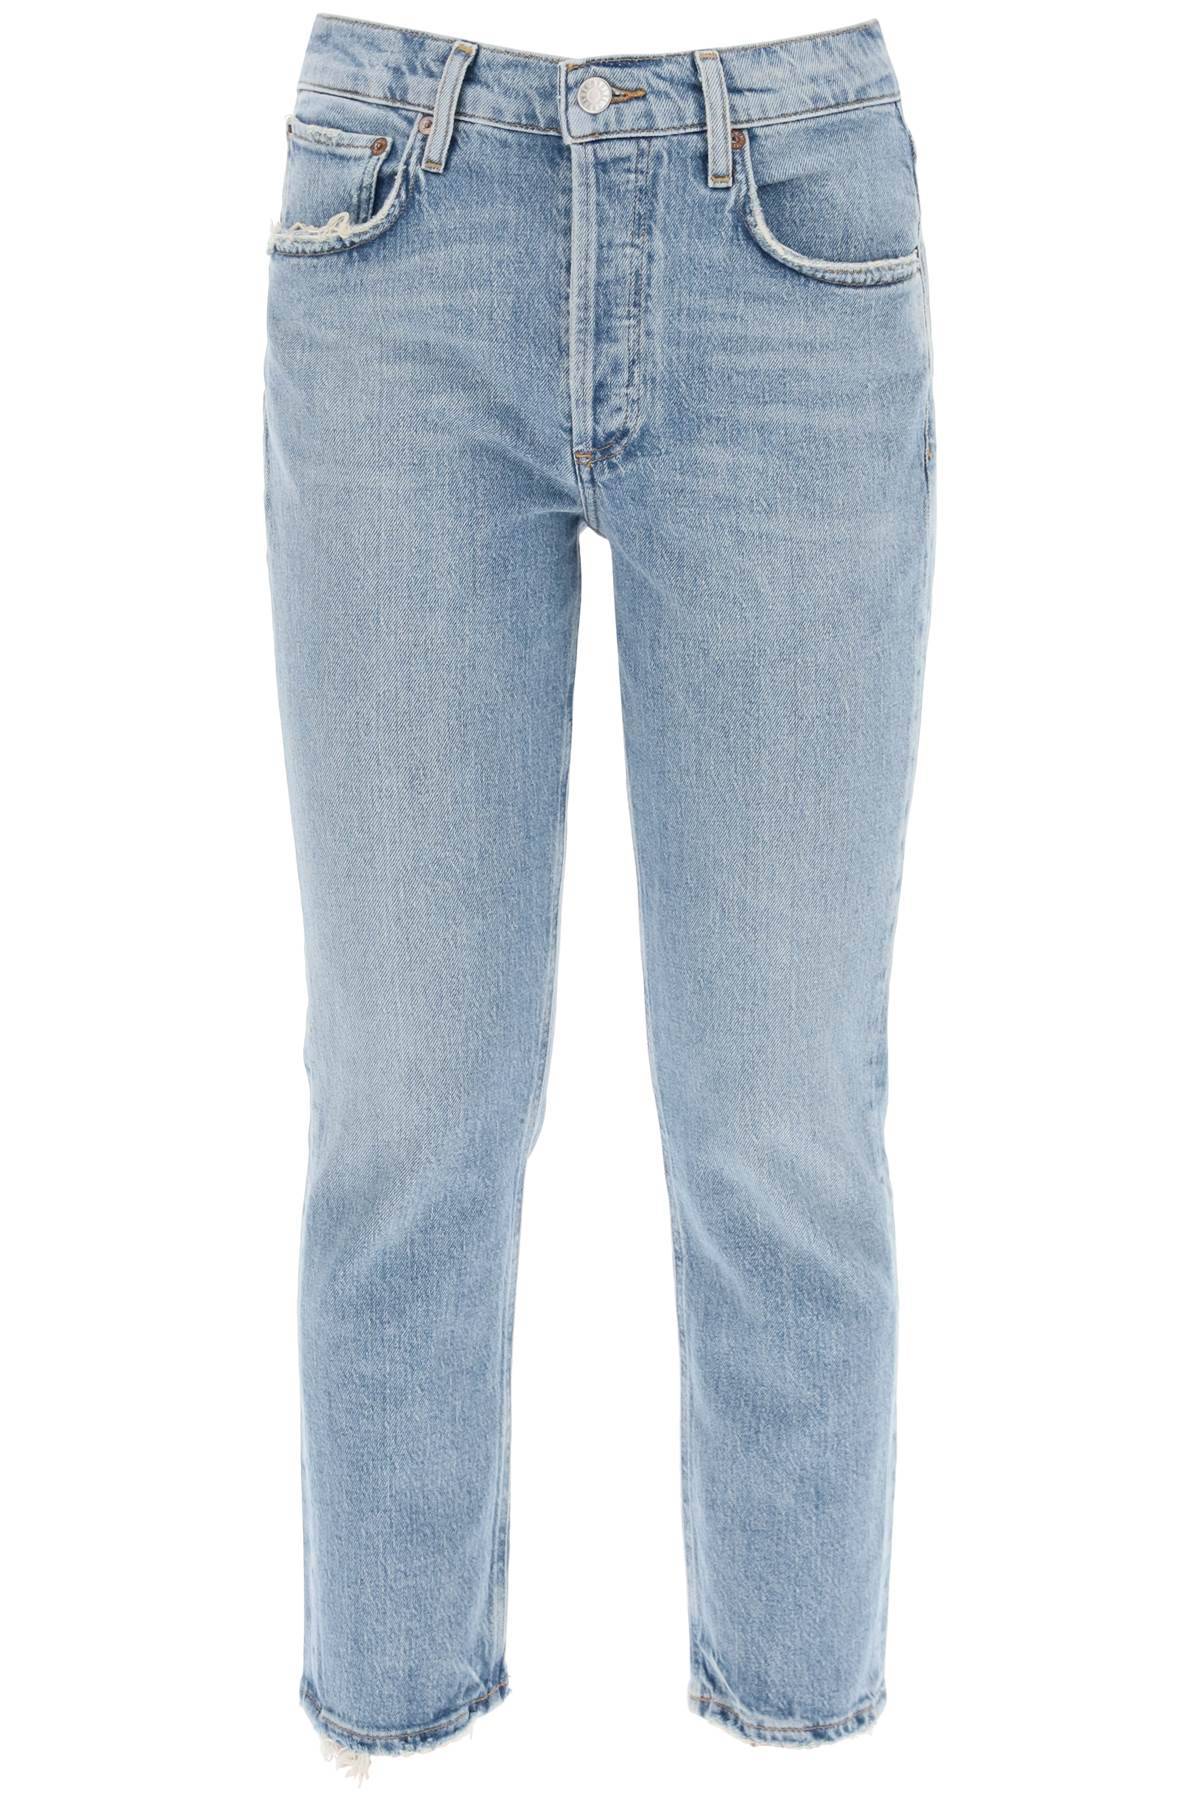 AGOLDE AGOLDE high-waisted straight cropped jeans in the